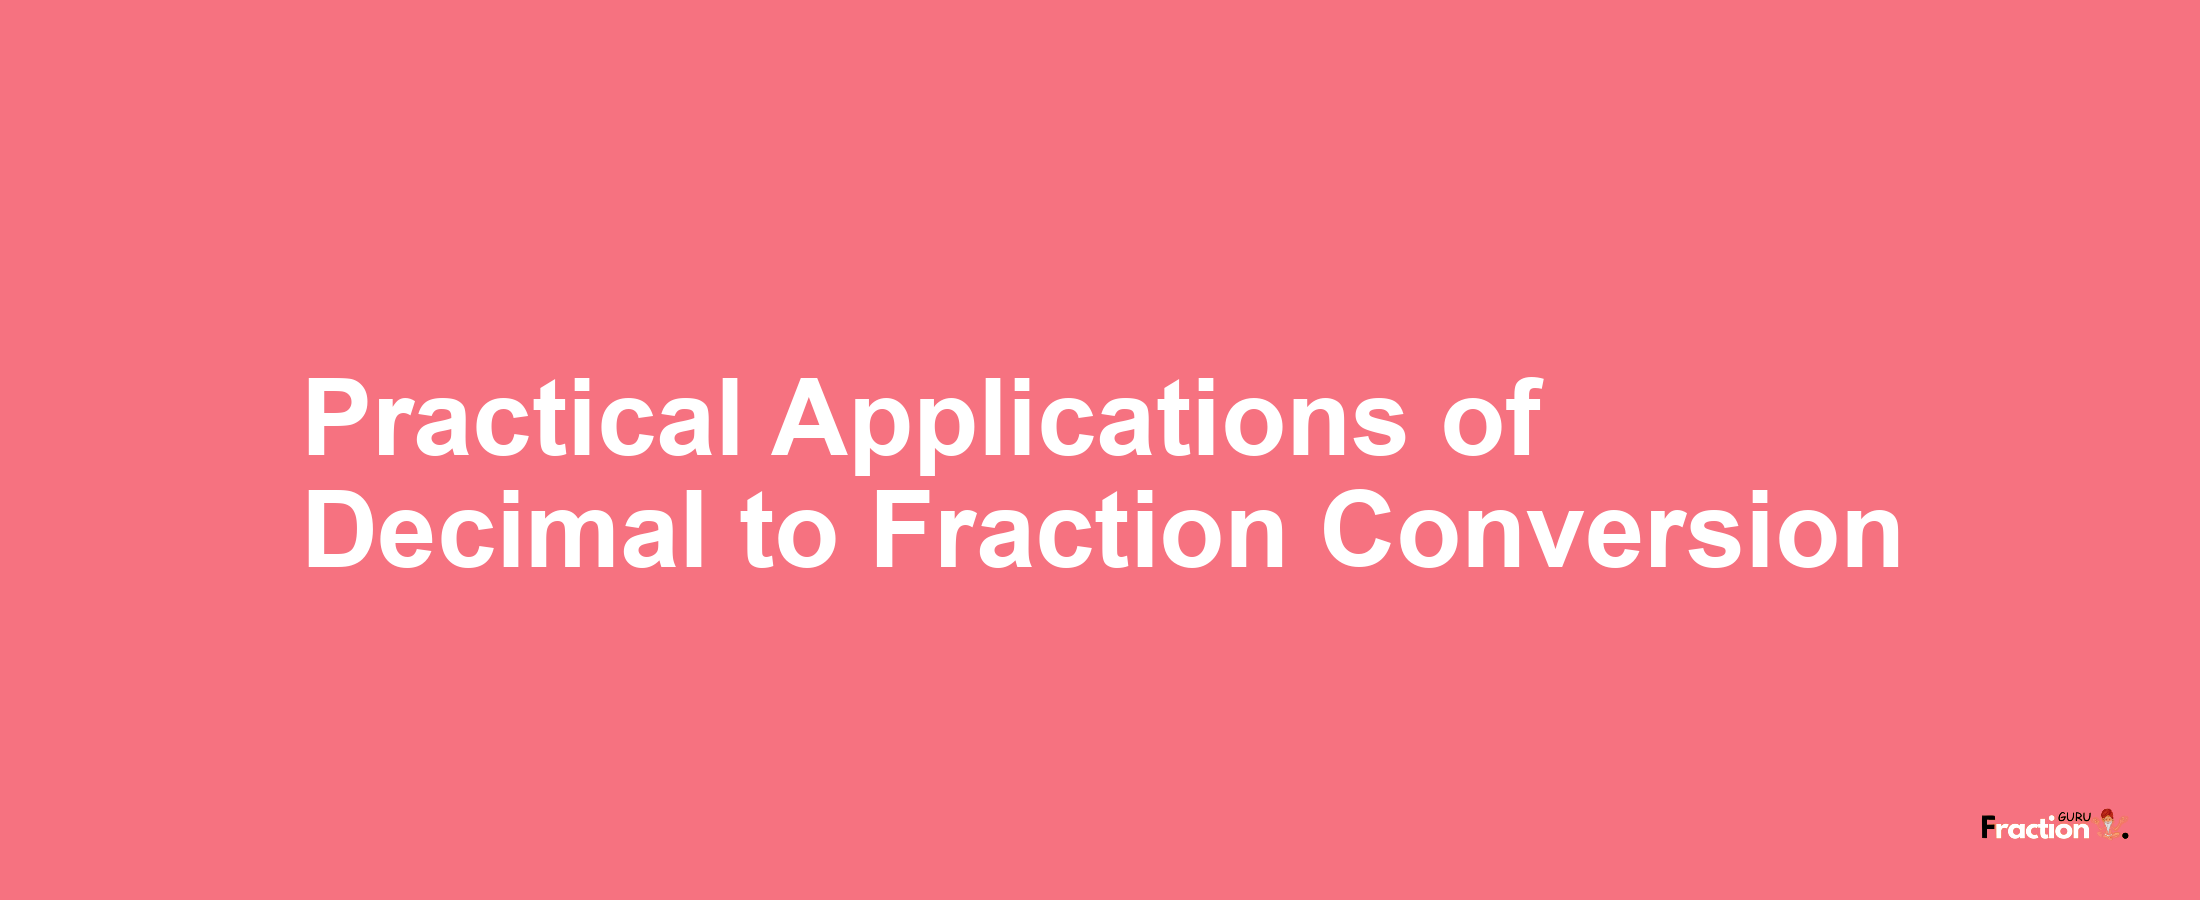 Practical Applications of Decimal to Fraction Conversion